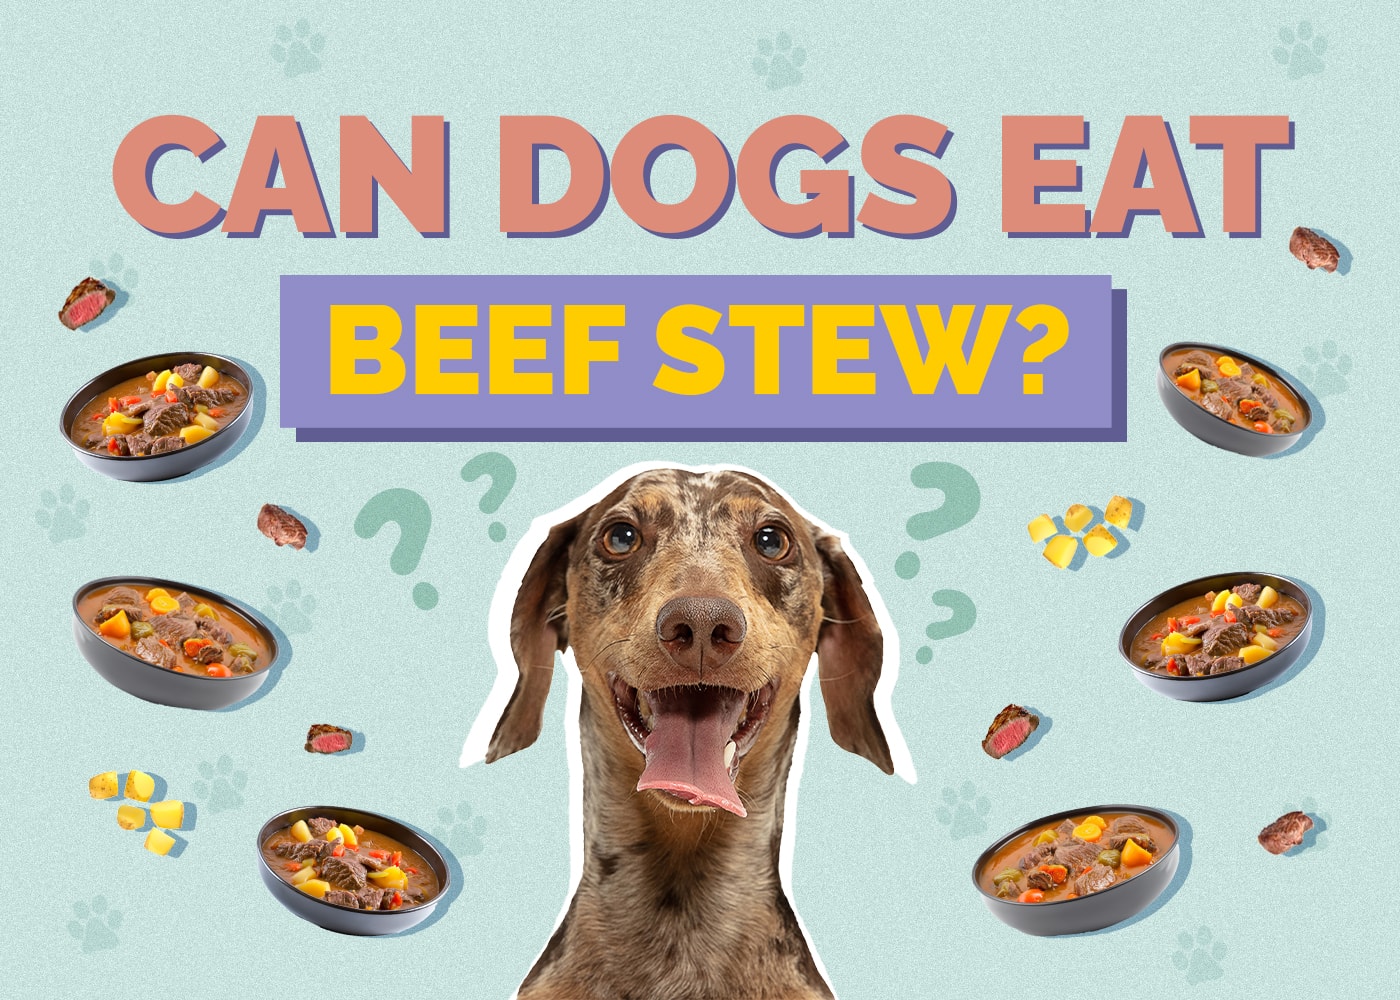 Can Dogs Eat Beef Stew